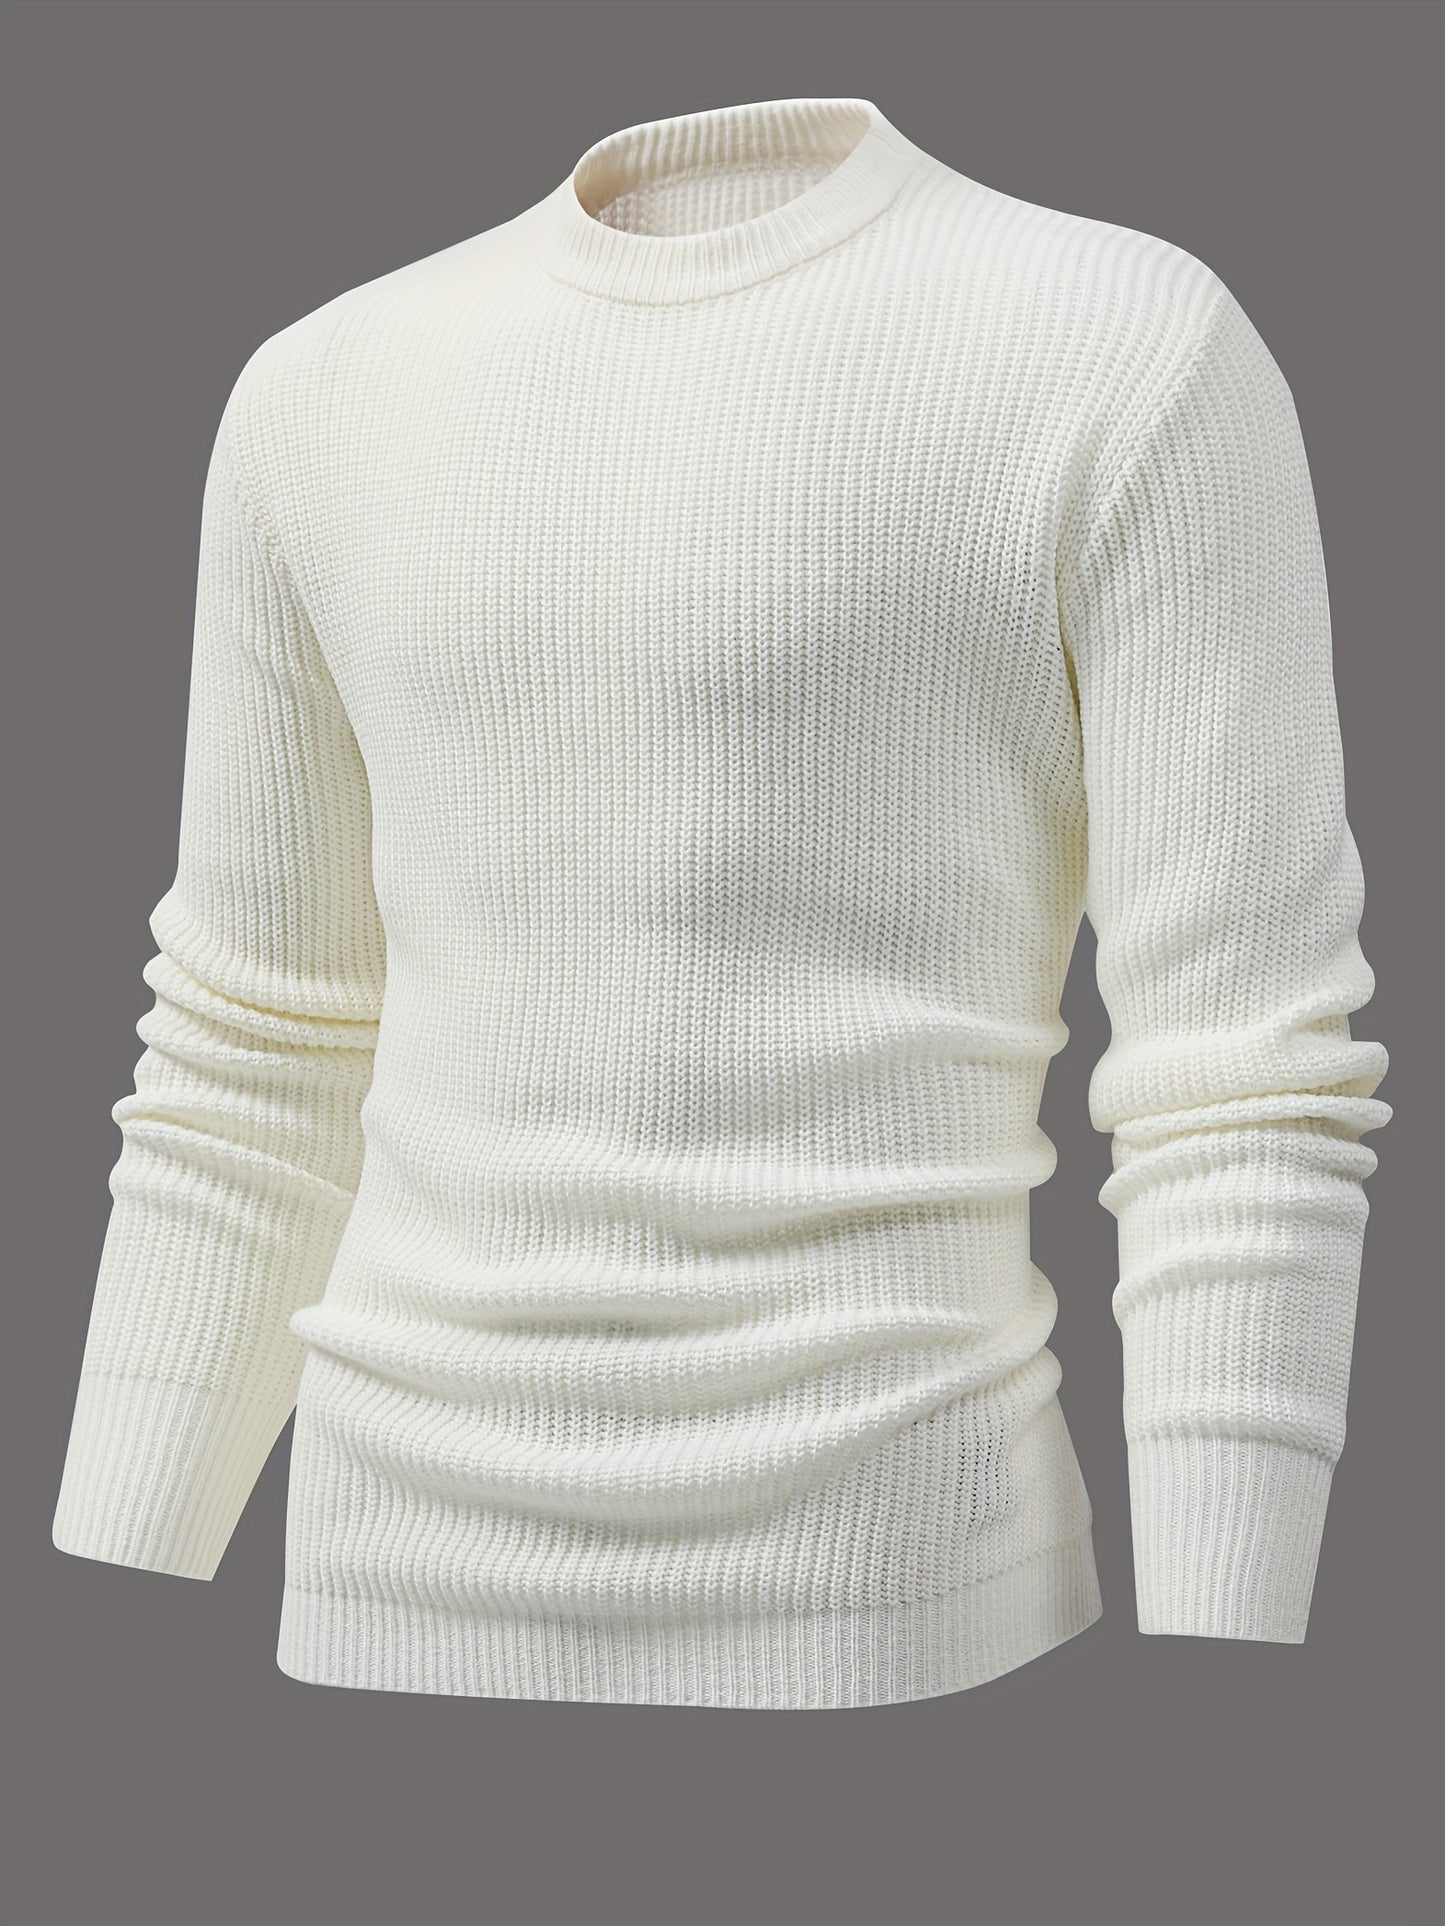 Foruwish - All Match Knitted Sweater, Men's Casual Warm Mid Stretch Round Neck Pullover Sweater For Fall Winter